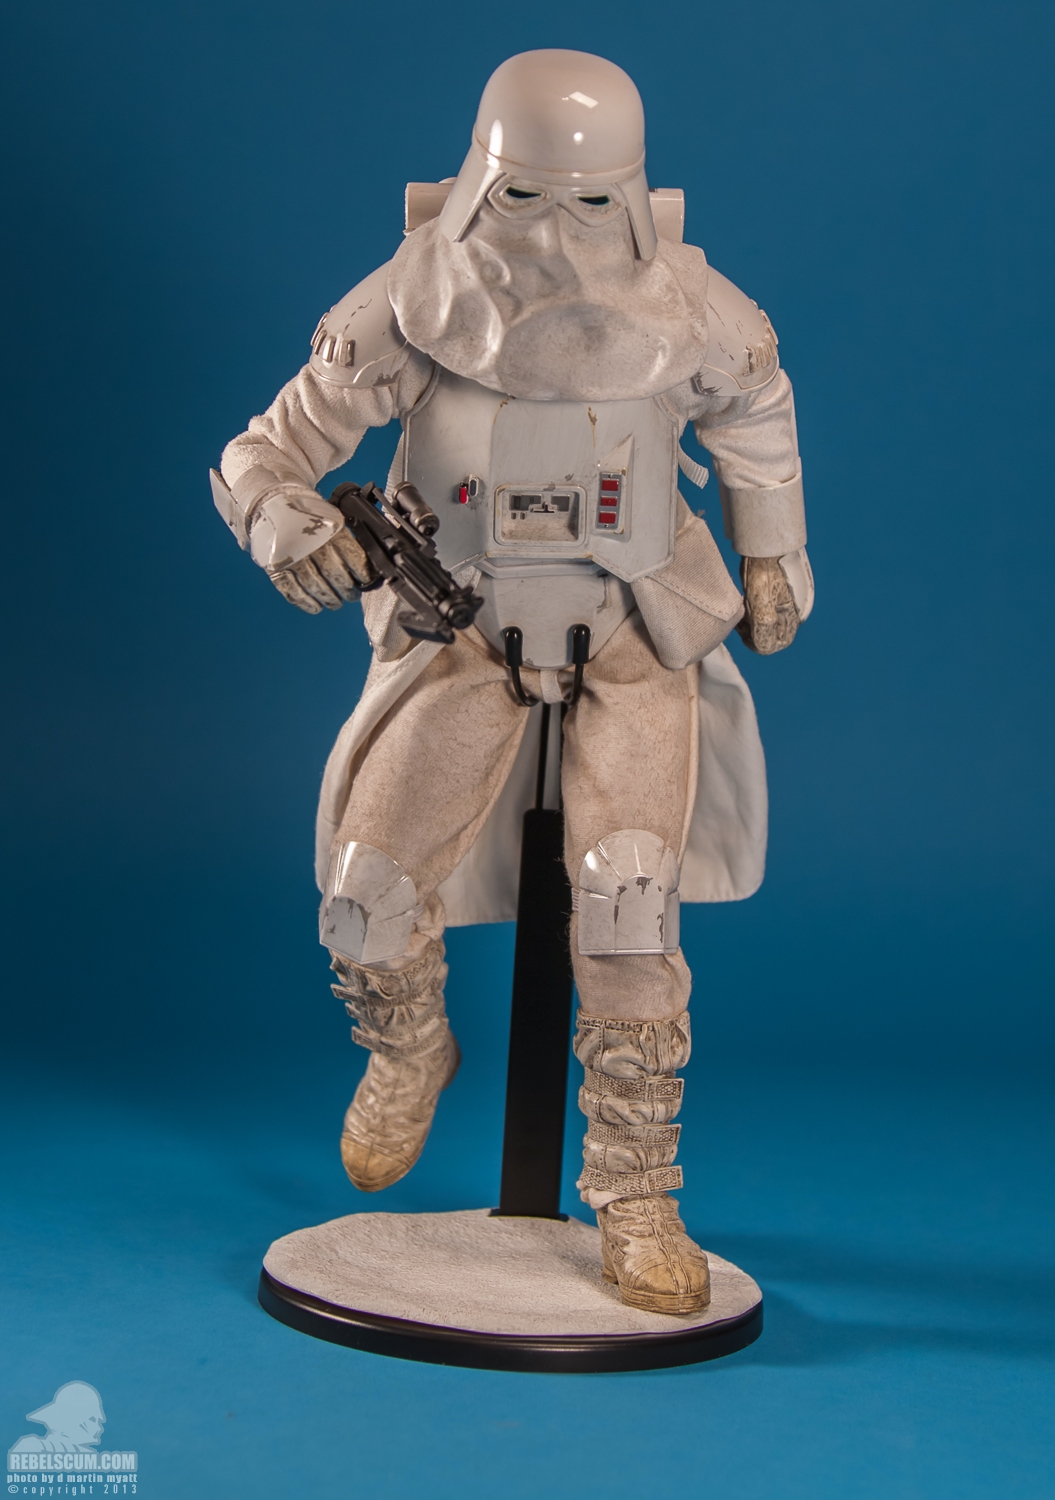 Snowtrooper_Militaries_Of_Star_Wars_Sideshow_Collectibles-12.jpg